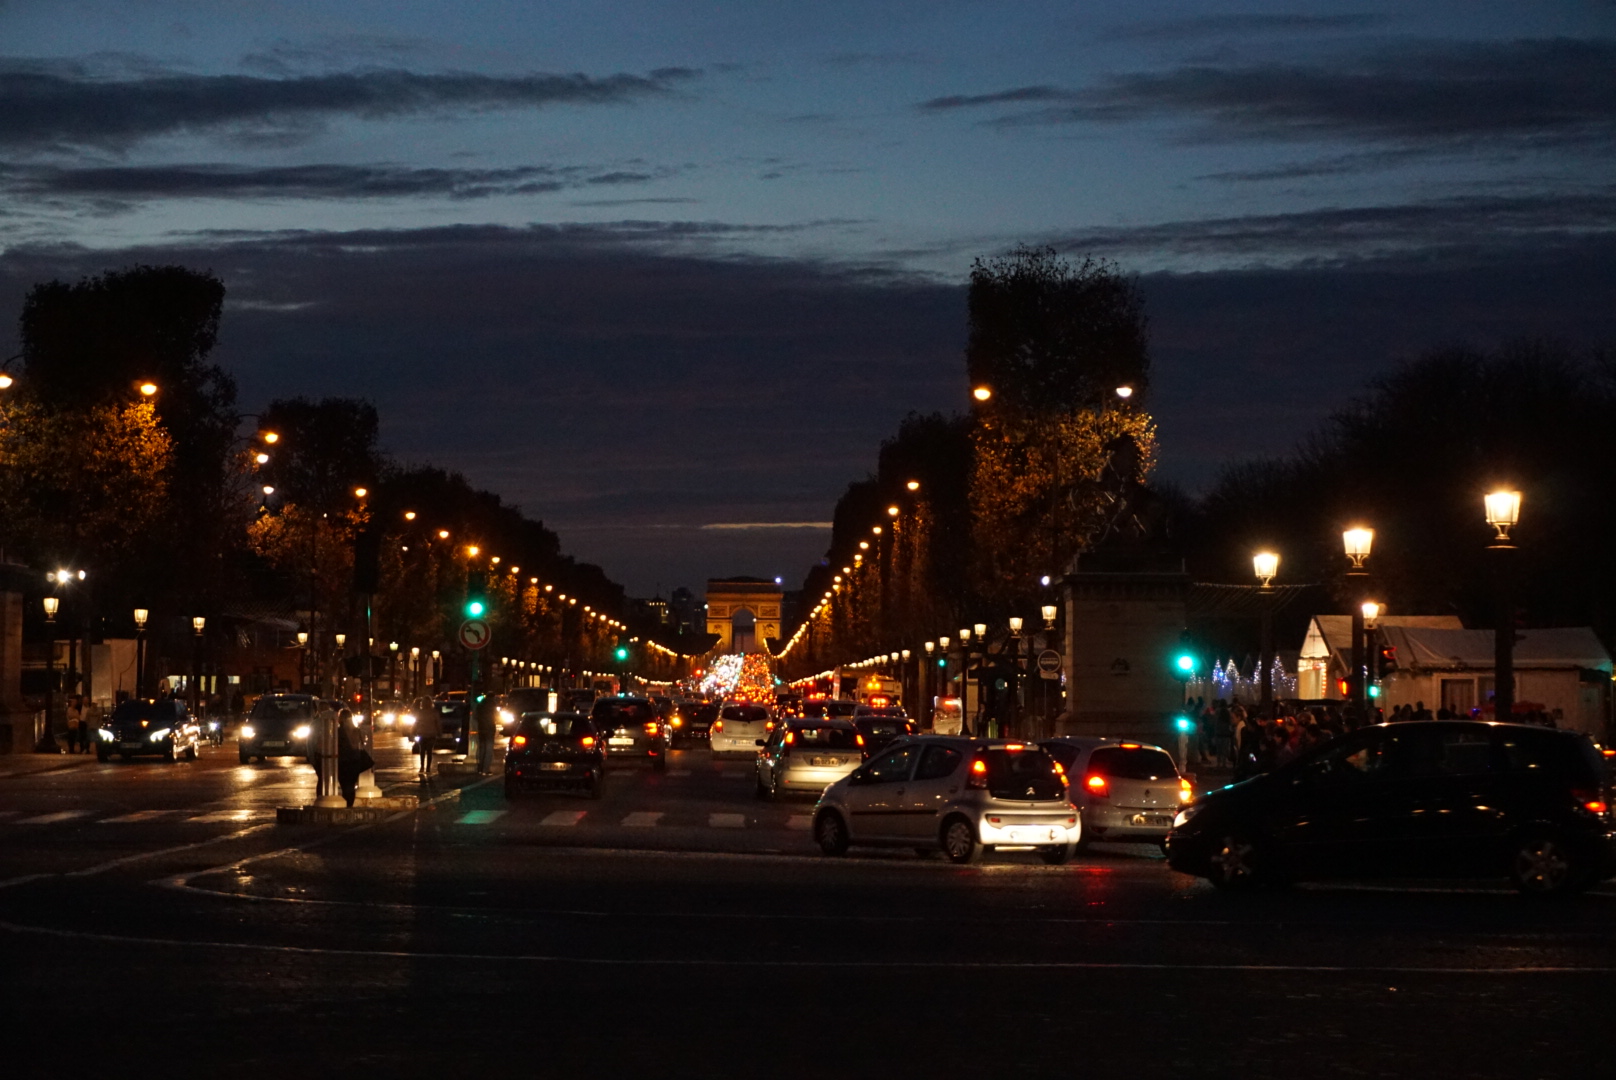 Walking around the major artery of the 8th neighbourhood in Paris, the Champs Elysees